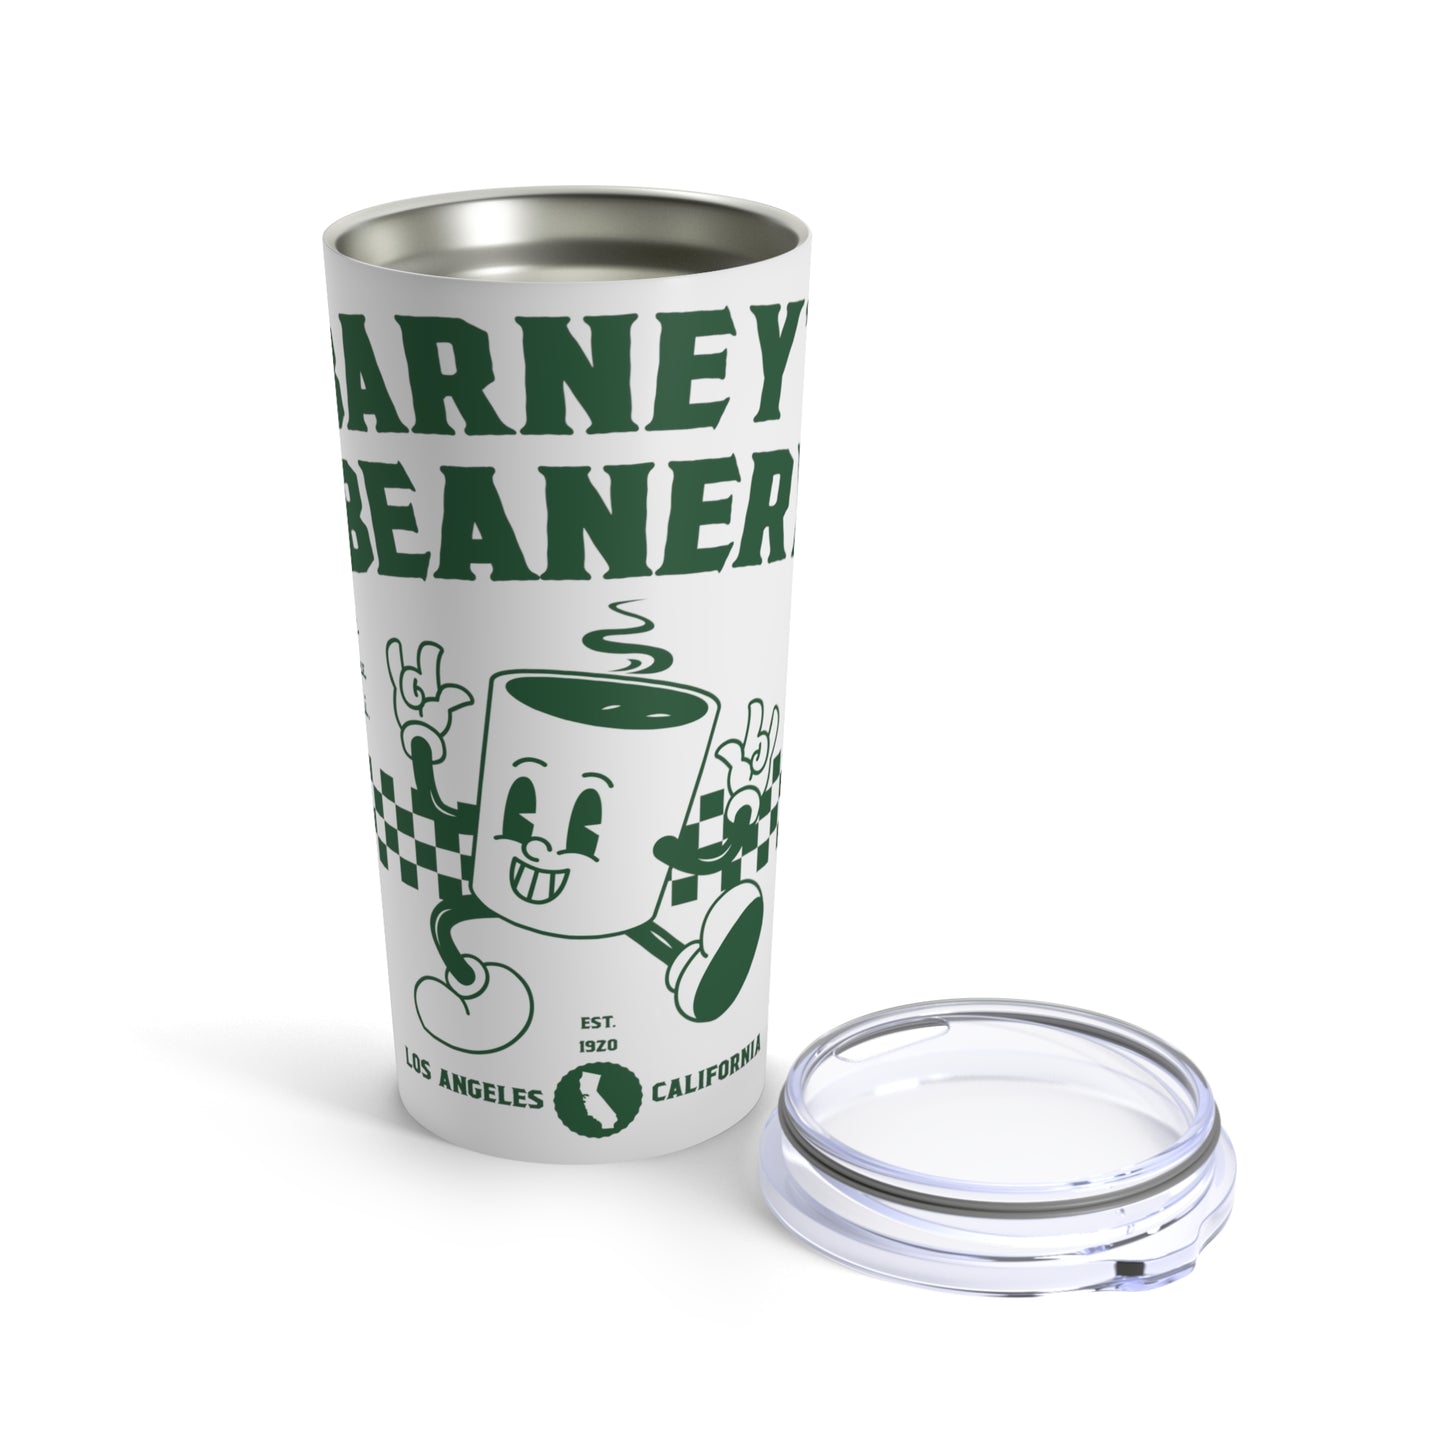 Eat More Chili. Drink More Beer. | BARNEY'S BEANERY - Green Tumbler 20oz